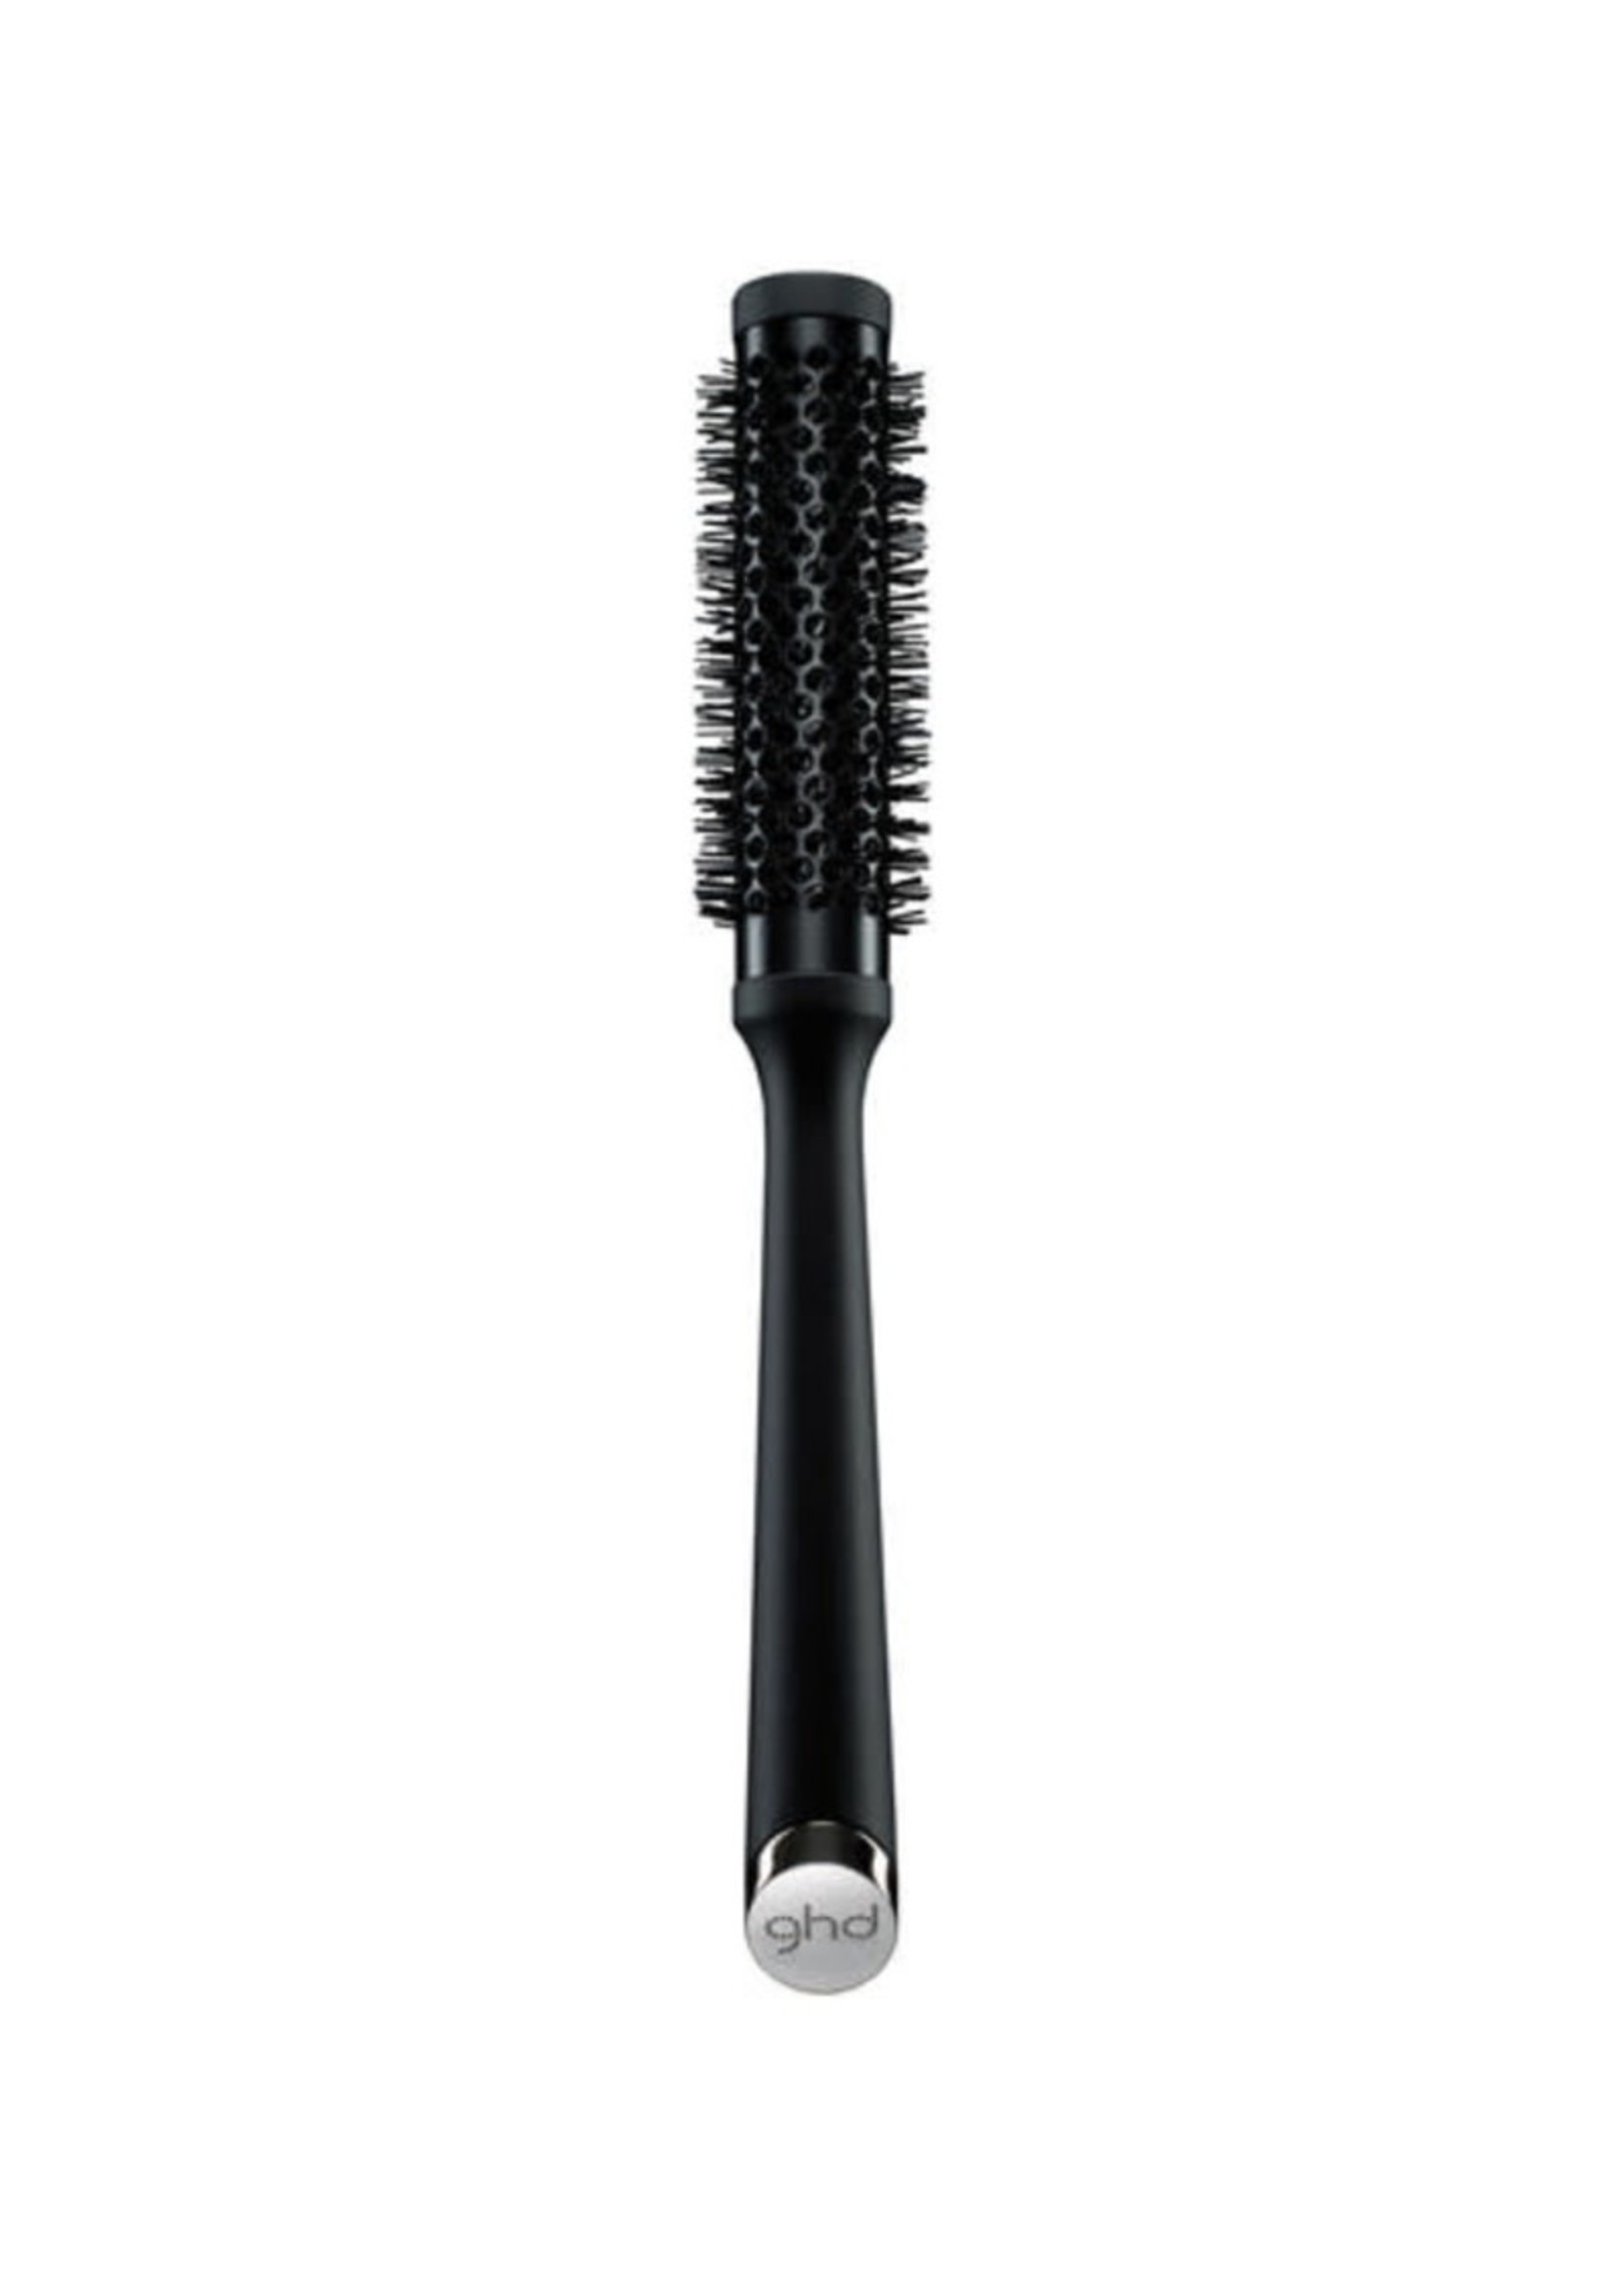 GHD GHD The Blow Dryer Ceramic Vented Radial Brush Size 1